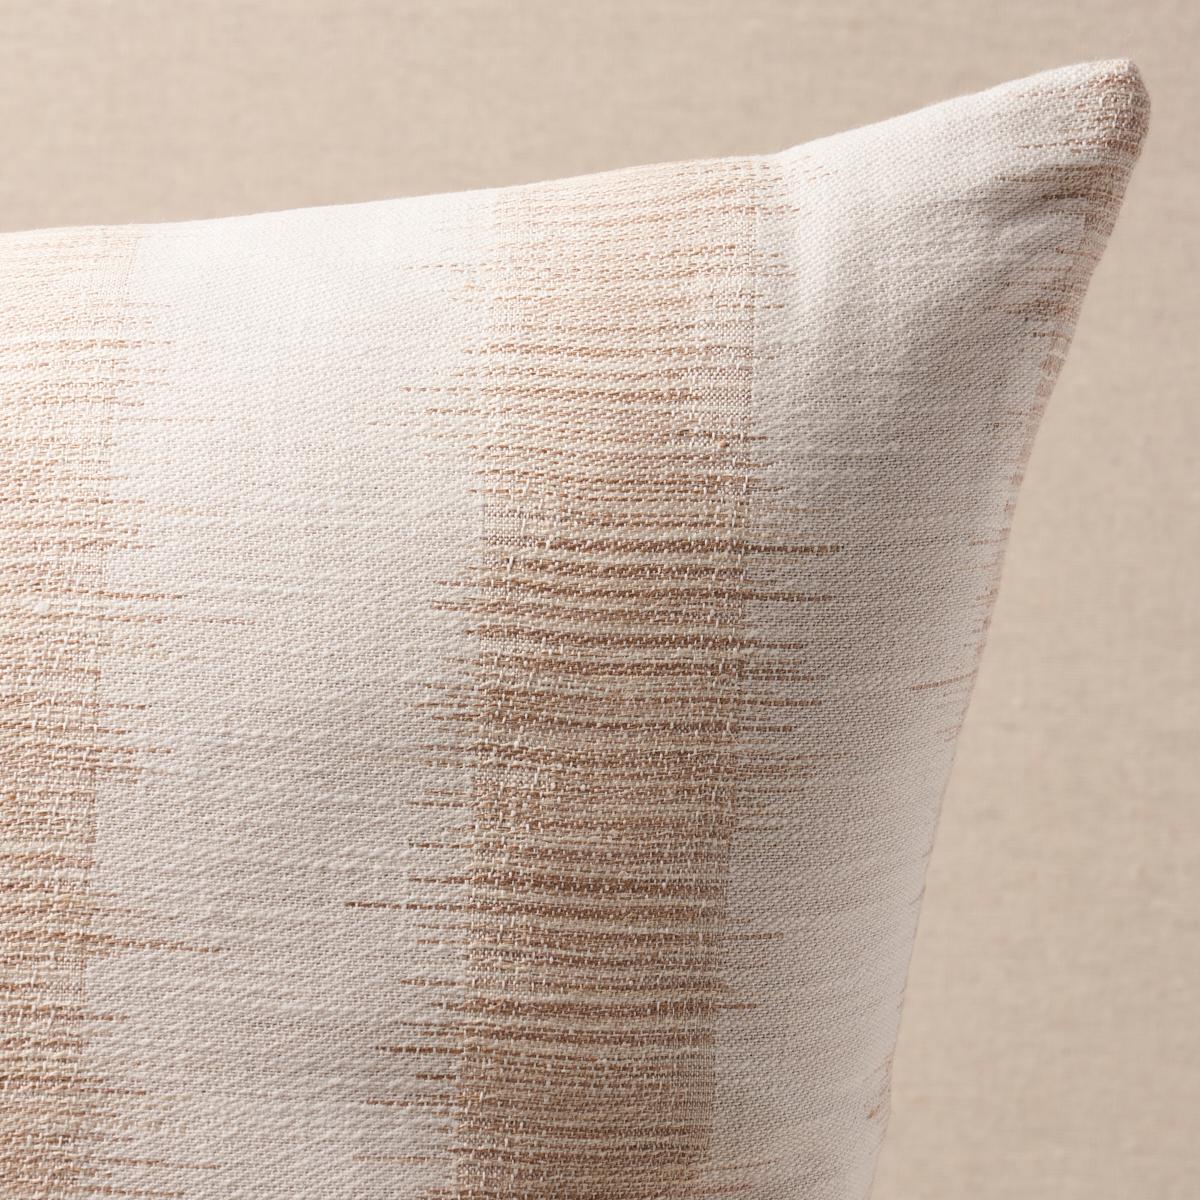 This pillow features Attleboro Ikat with a knife edge finish. Attleboro Ikat is a woven, irregular stripe made of twisted cotton and linen yarns. Pillow includes a feather/down fill insert and hidden zip closure.
  